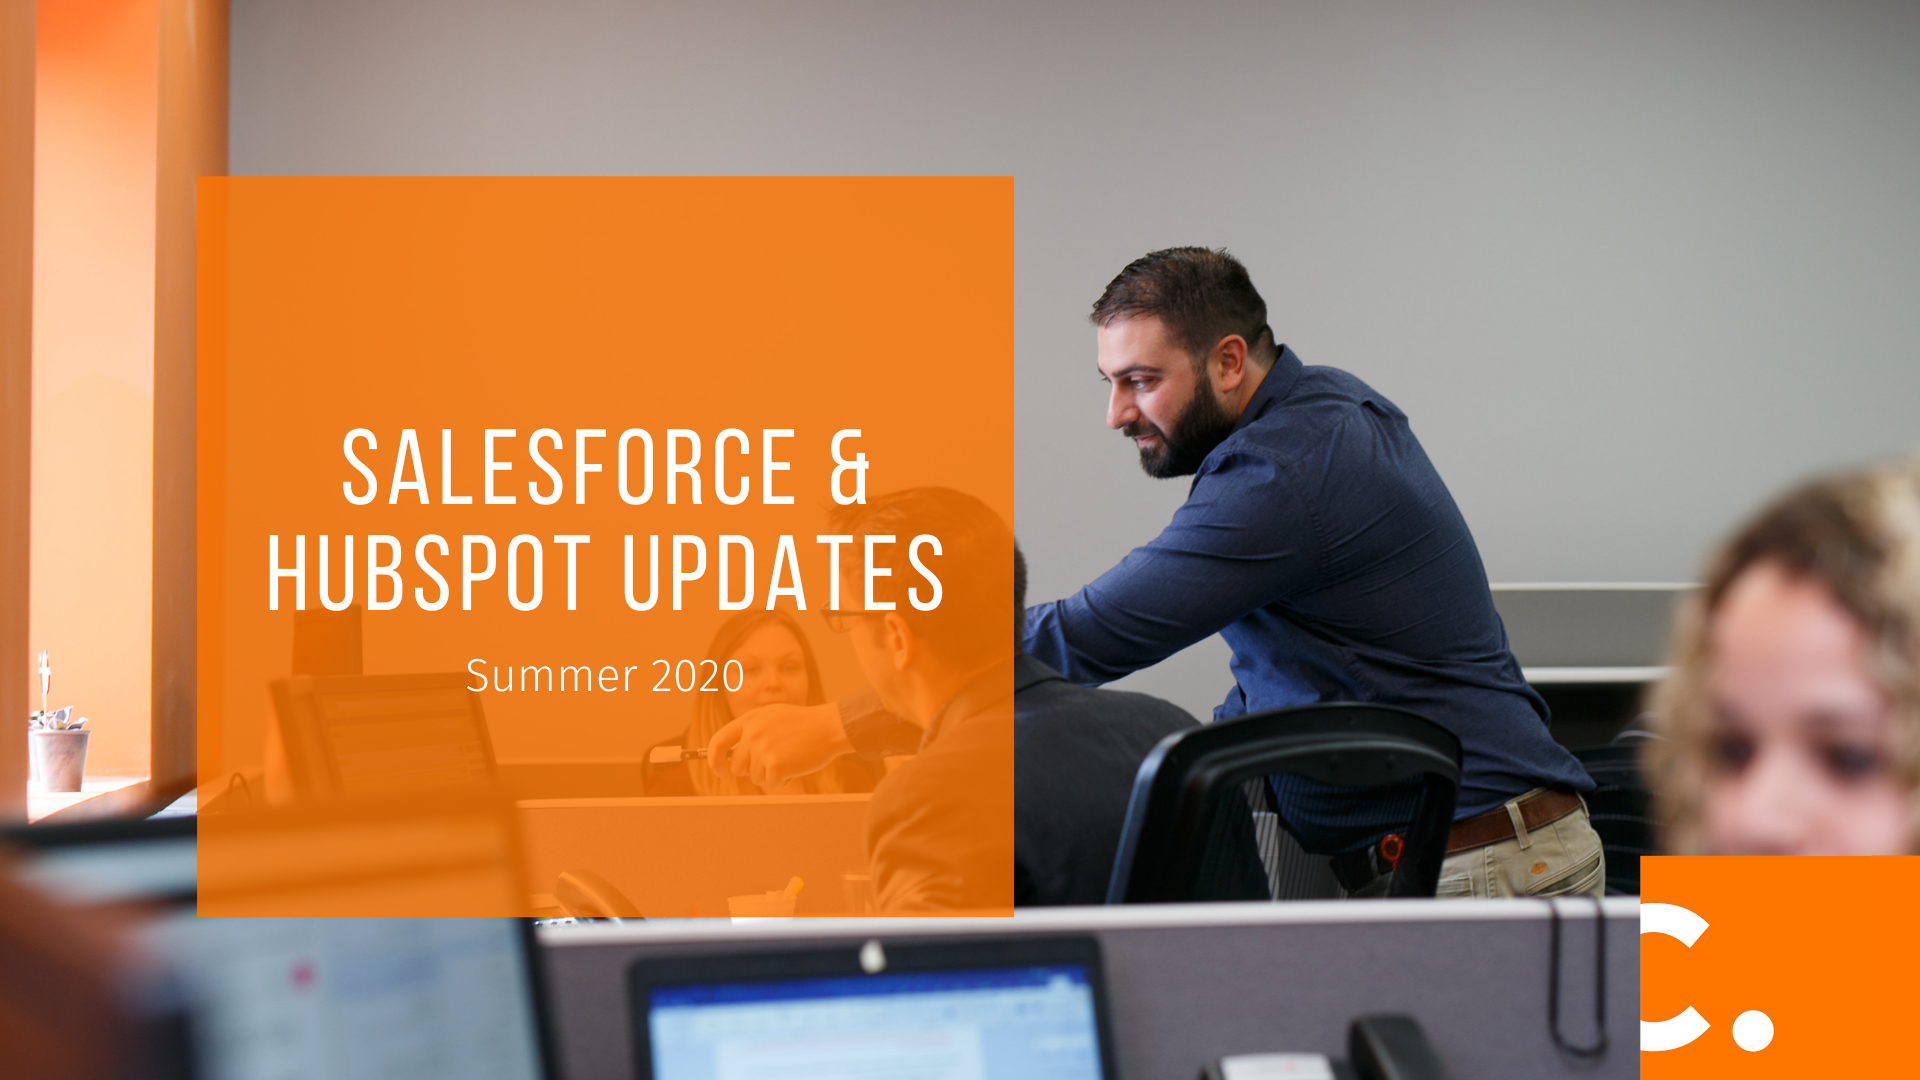 What you can expect with the Summer 2020 Salesforce and HubSpot updates